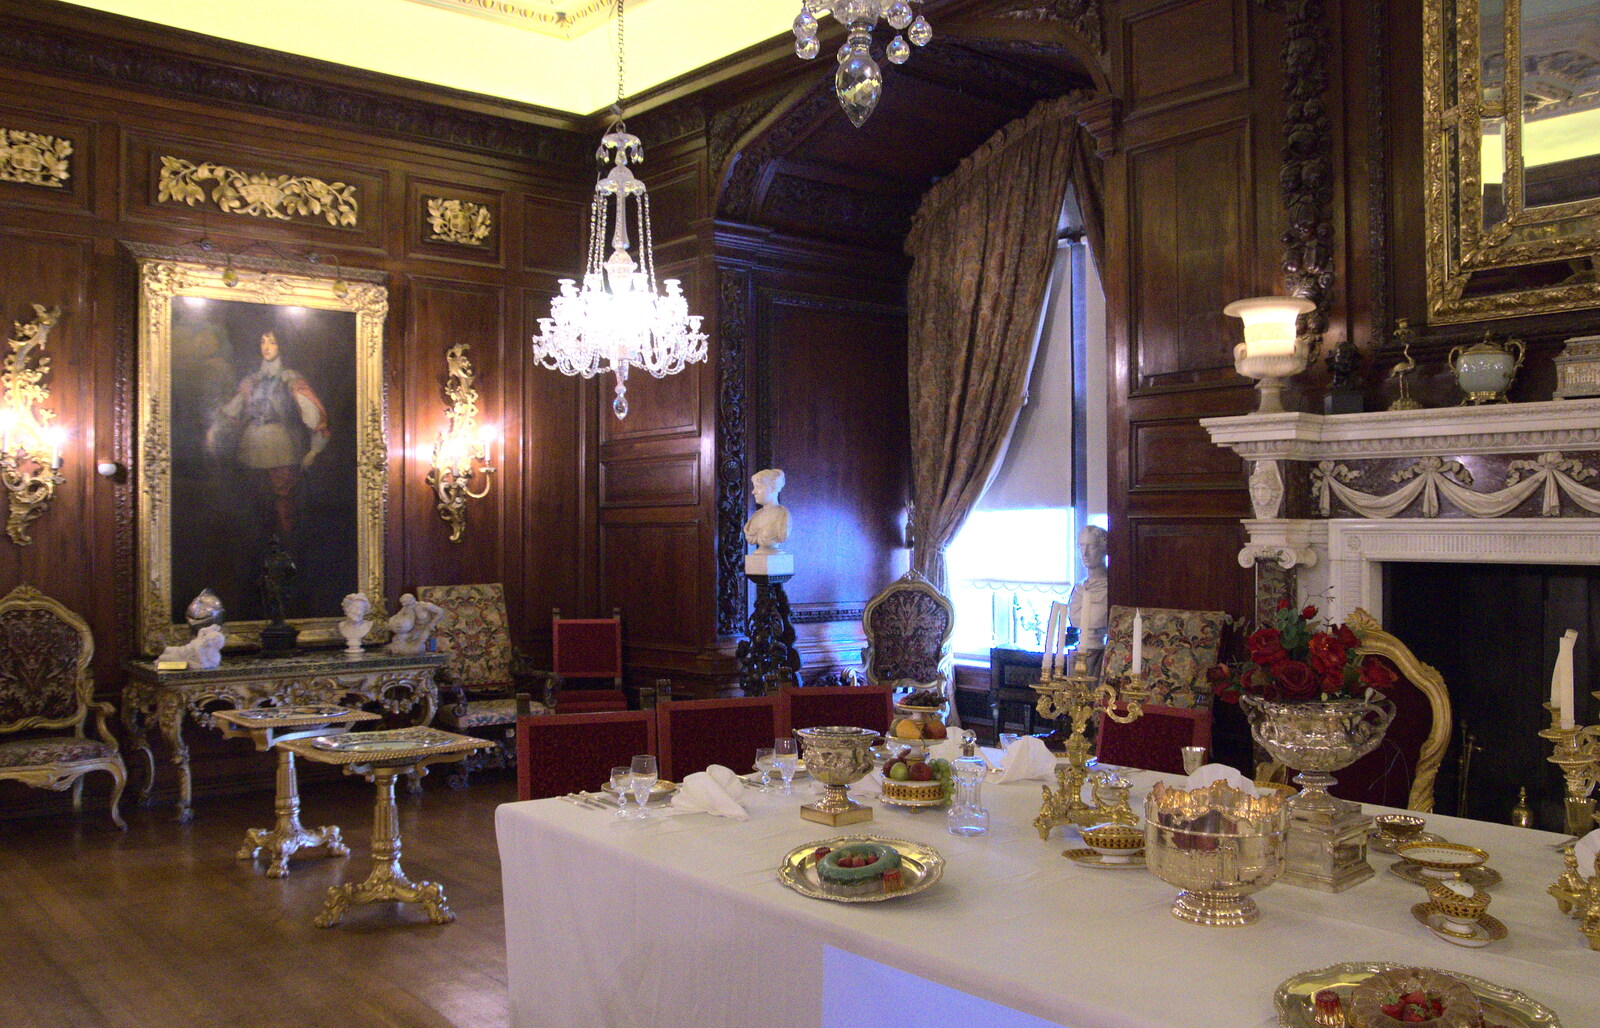 Another dining room from A Day at Warwick Castle, Warwickshire - 8th September 2018